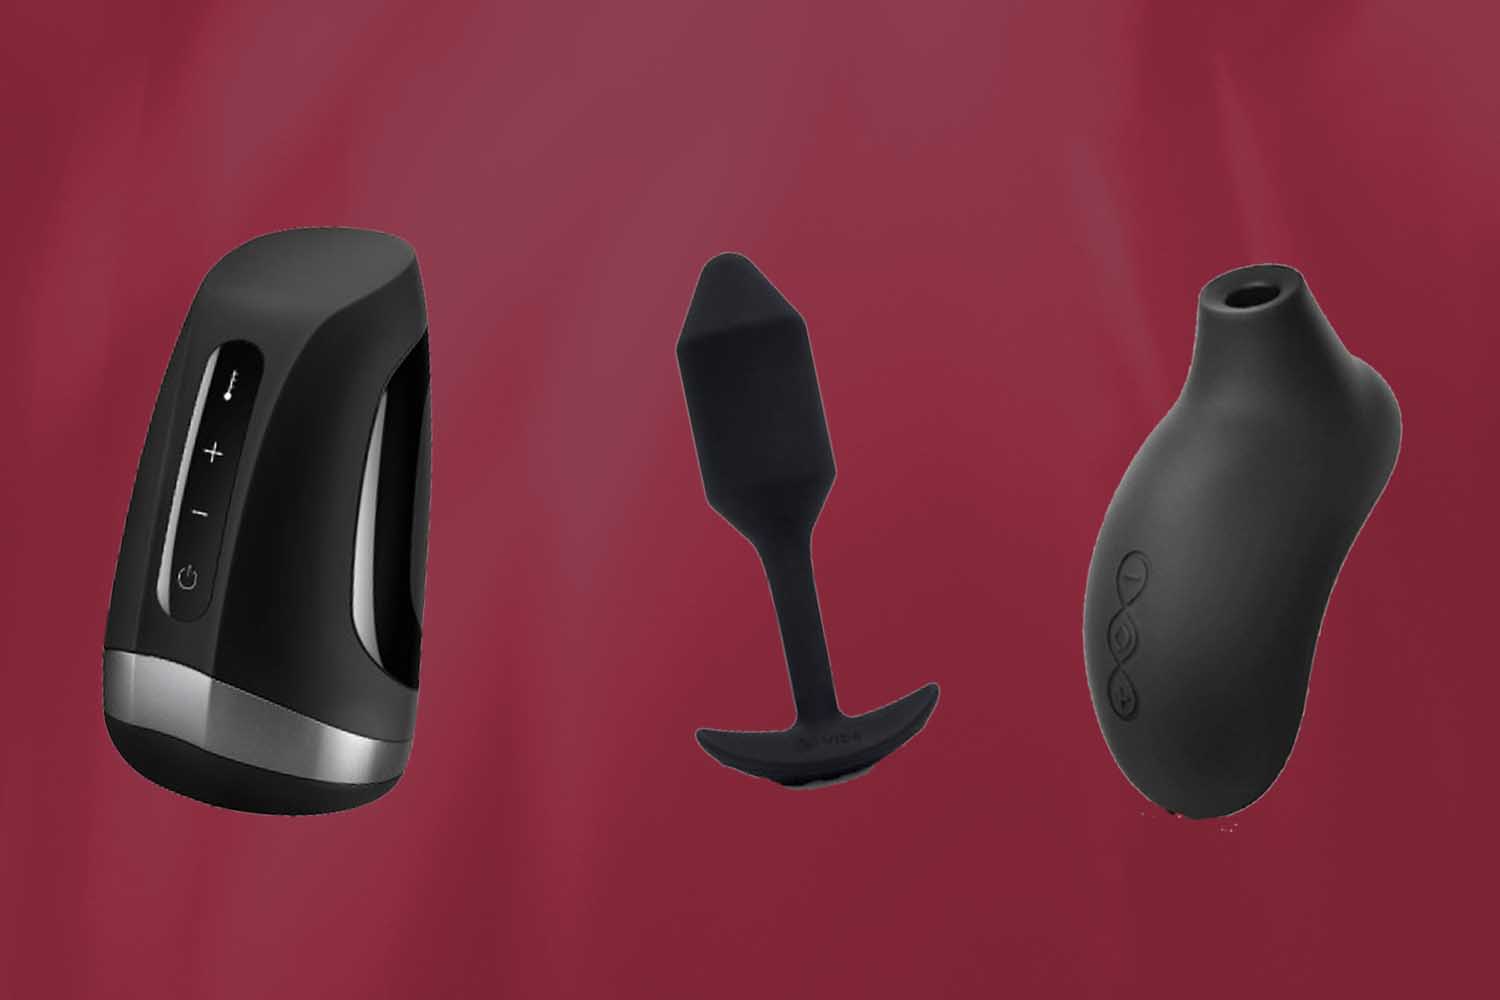 Deal: Save Up to 60% On a Ton of Sleek, Sexy Sex Toys